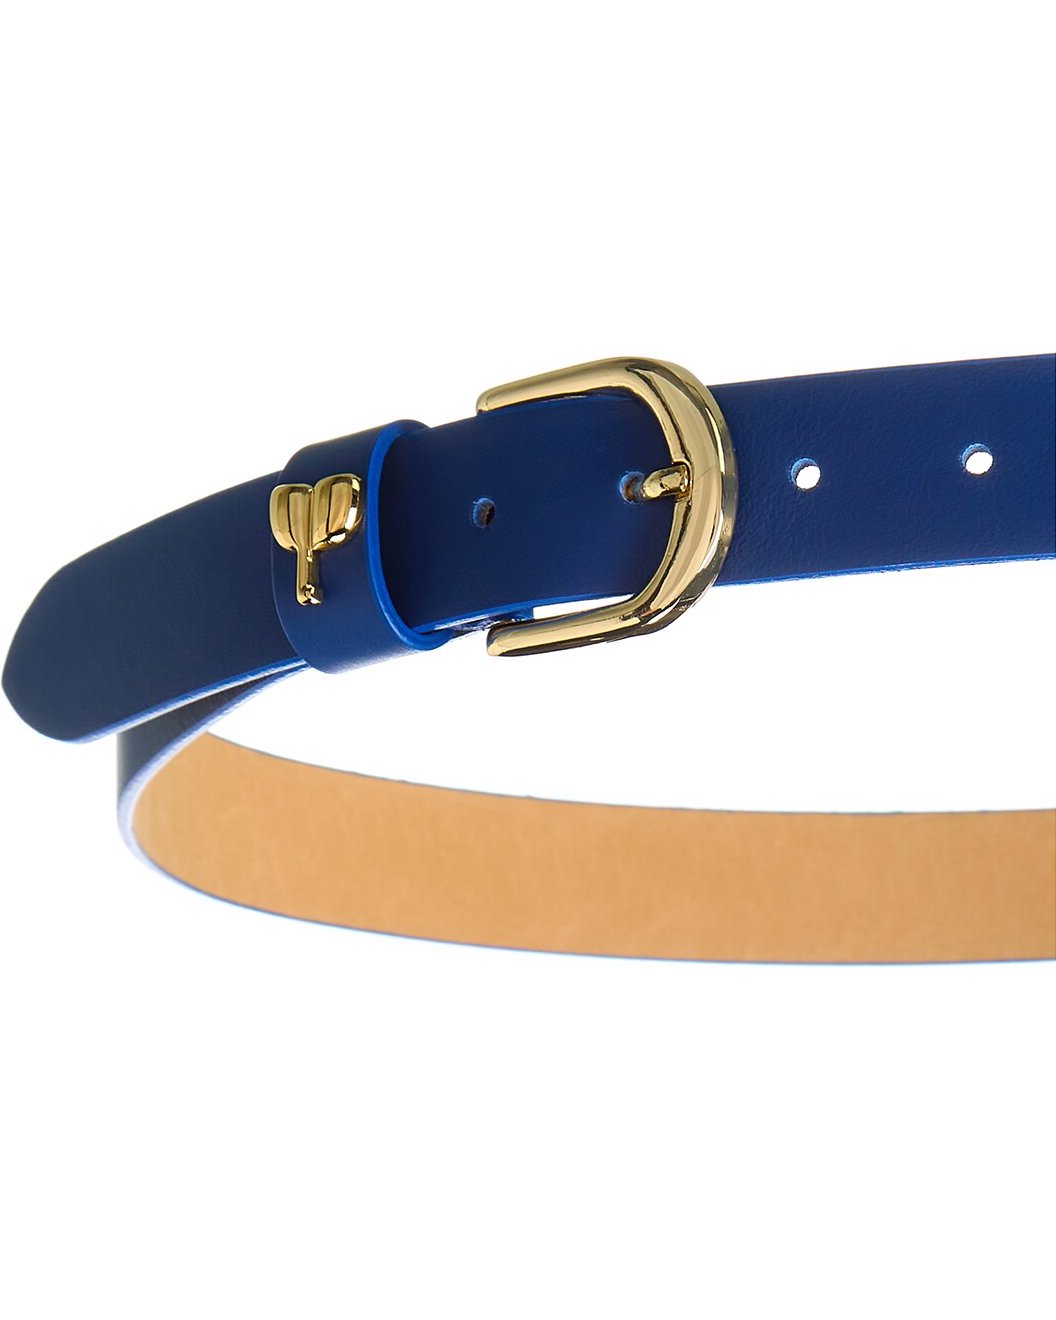 Leather Belt with Logo